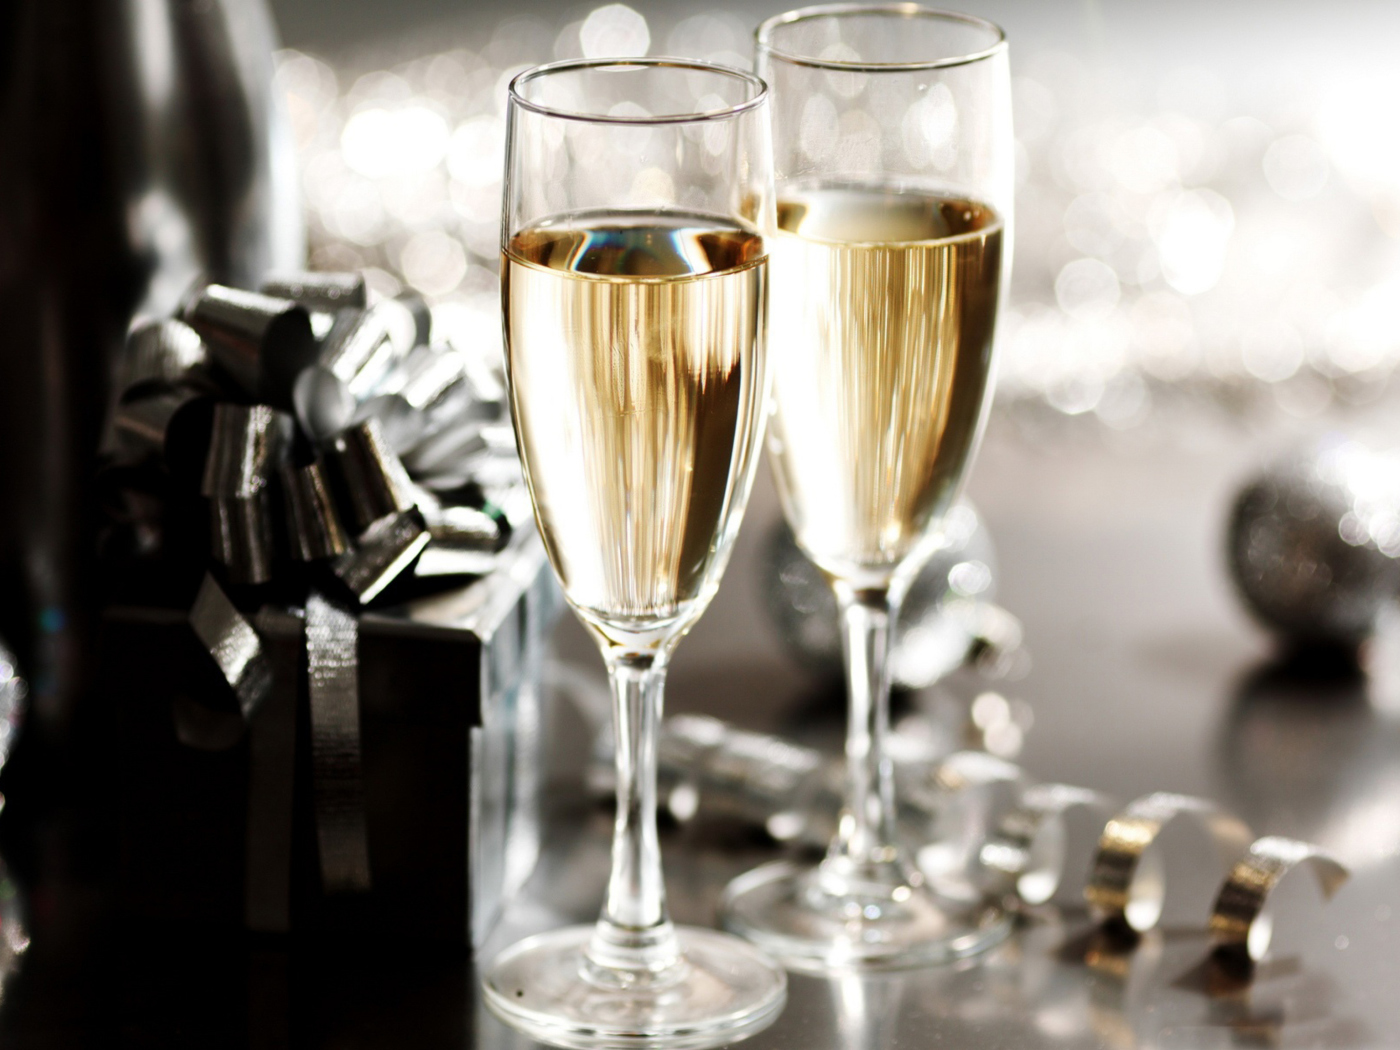 New Years Eve Champagne wallpaper 1400x1050